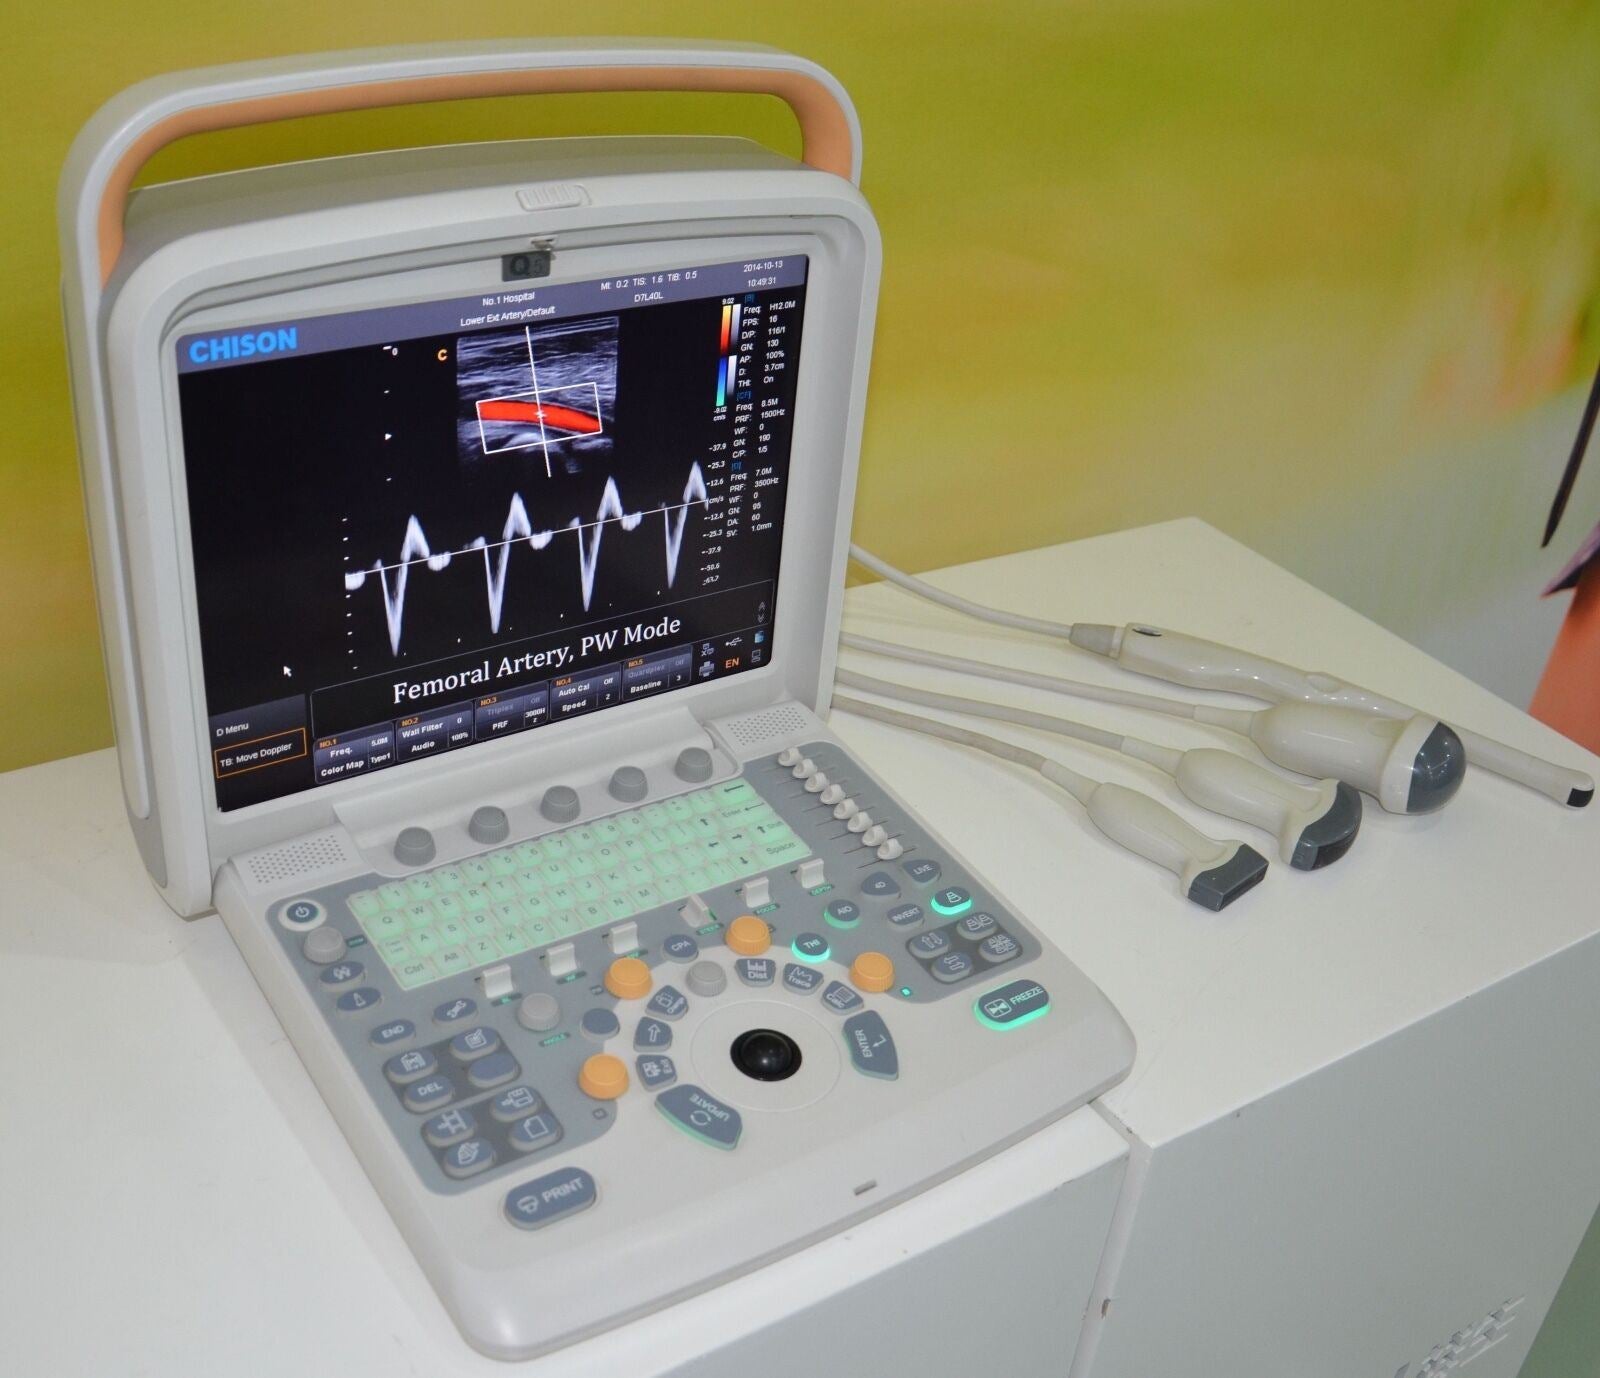 Color Doppler Ultrasound Chison Q5, with 4D Probe for Obstetrics and Gynecology DIAGNOSTIC ULTRASOUND MACHINES FOR SALE